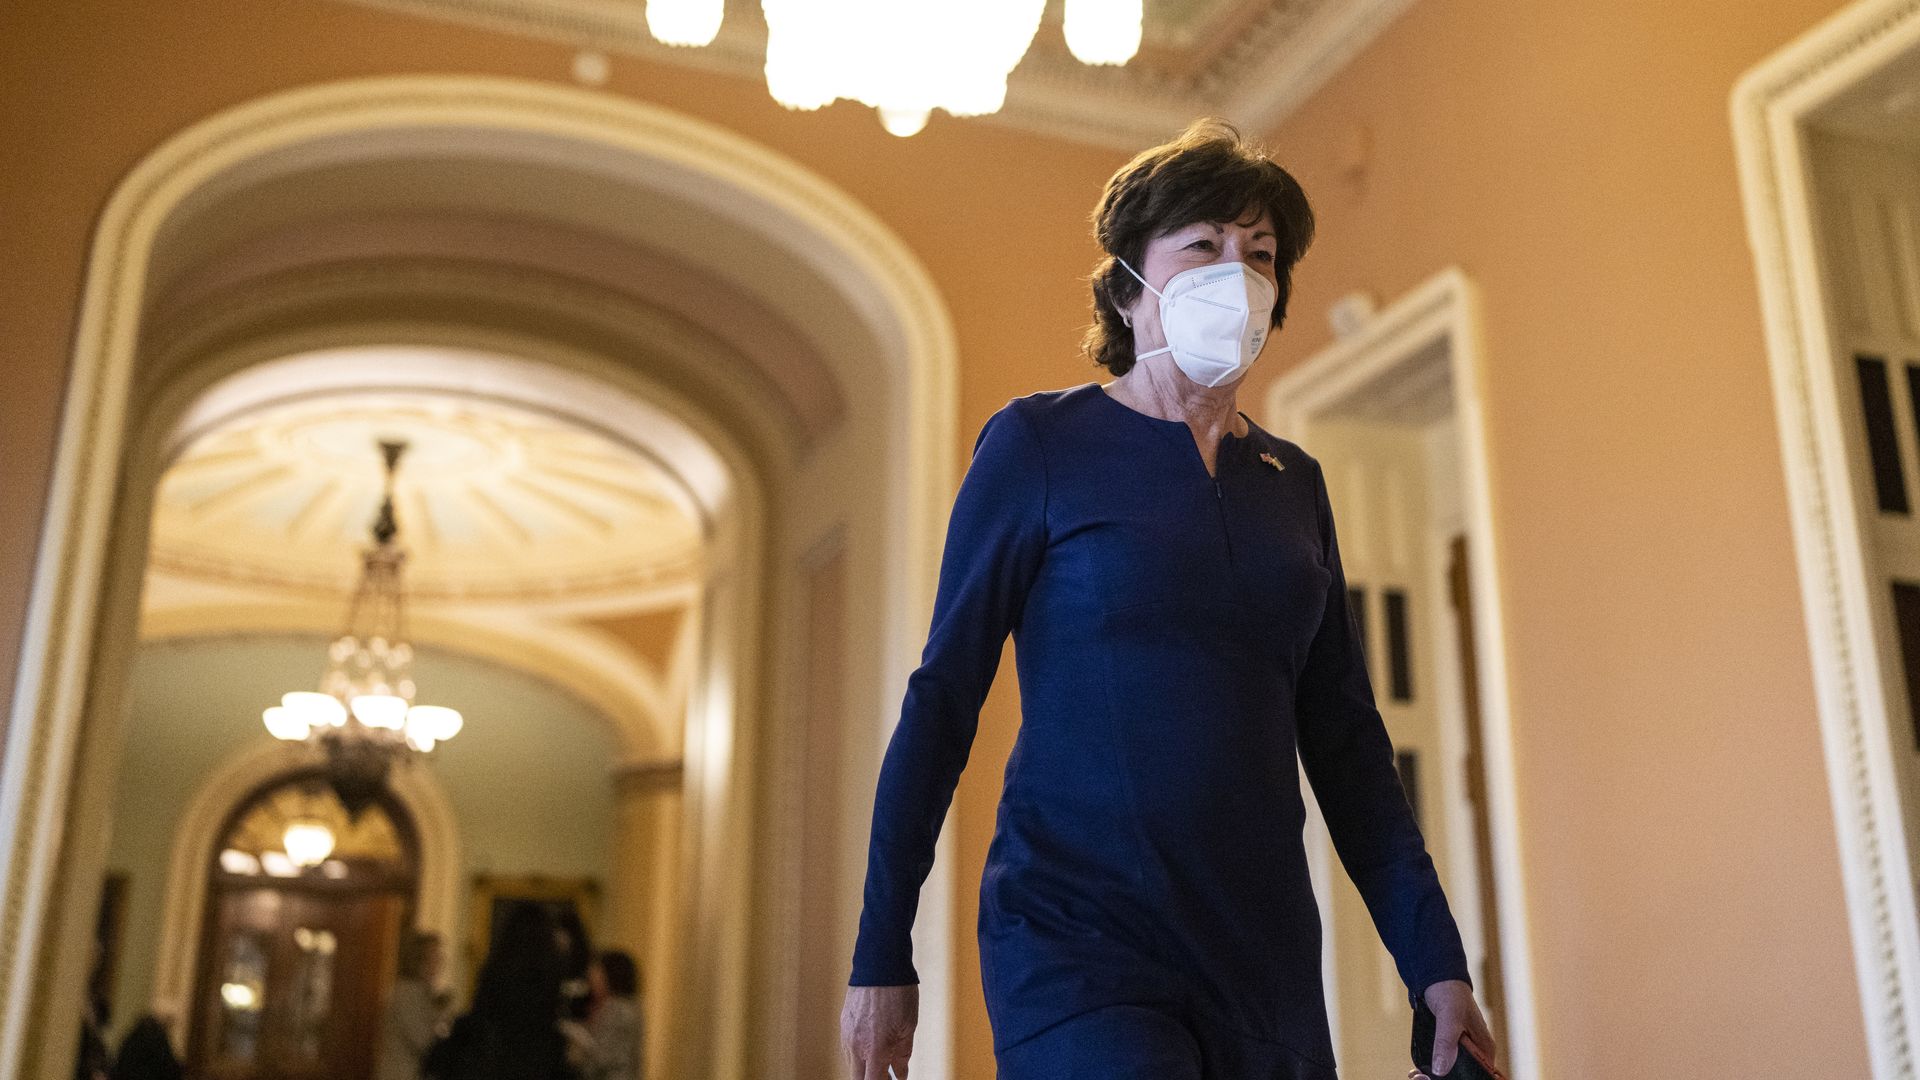 Susan Collins (R-ME) exits the Senate Chamber at the U.S. Capitol on April 7